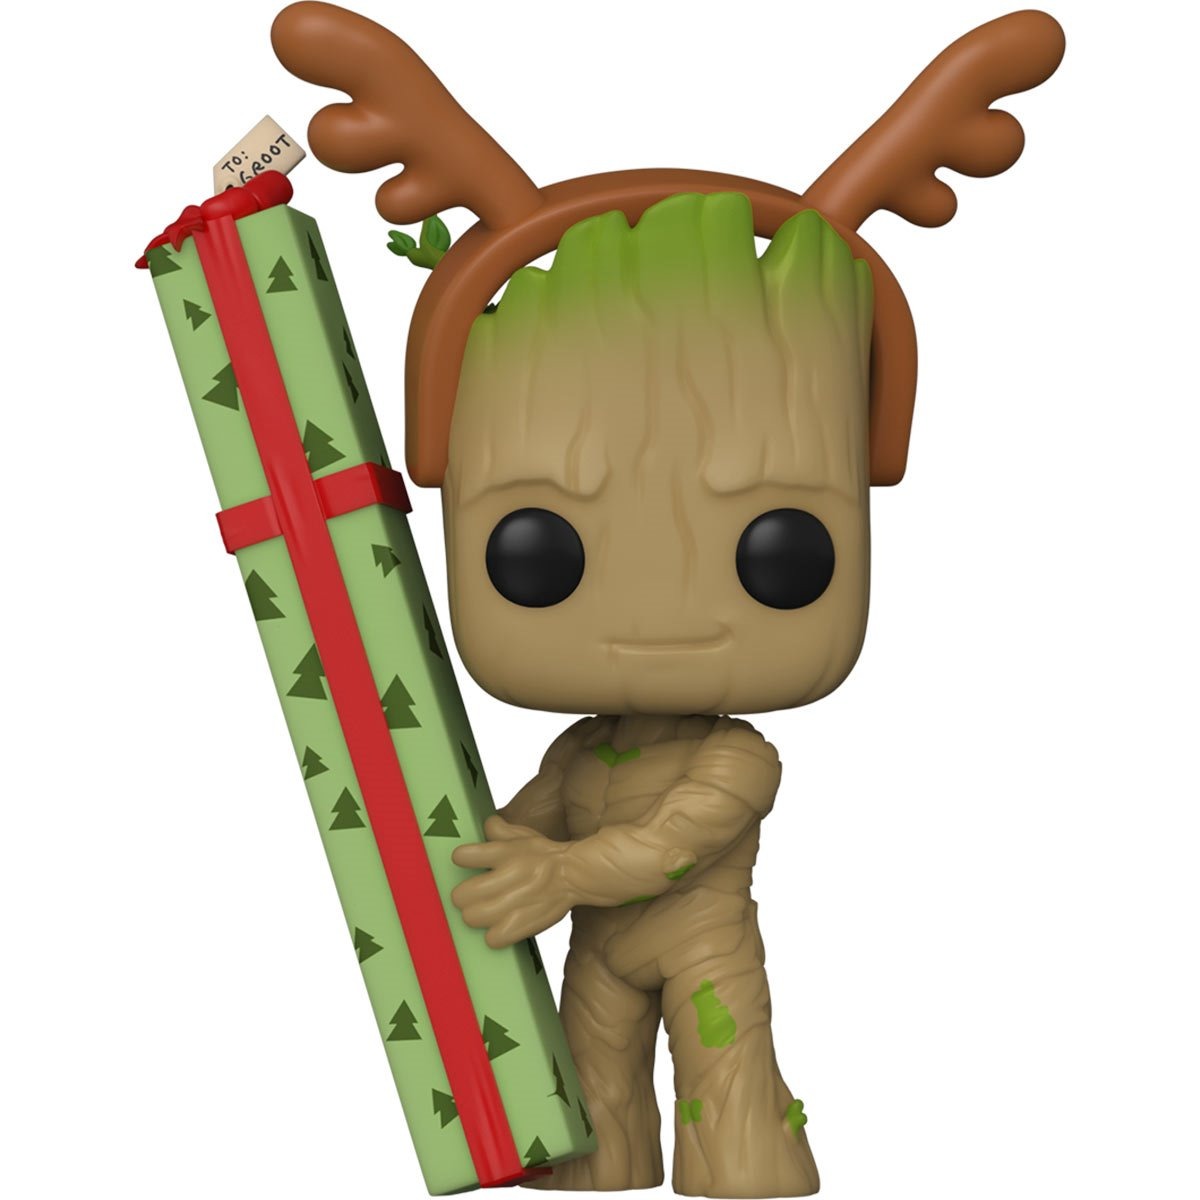 FU64332The Guardians of the Galaxy Holiday Special Groot Pop! Vinyl